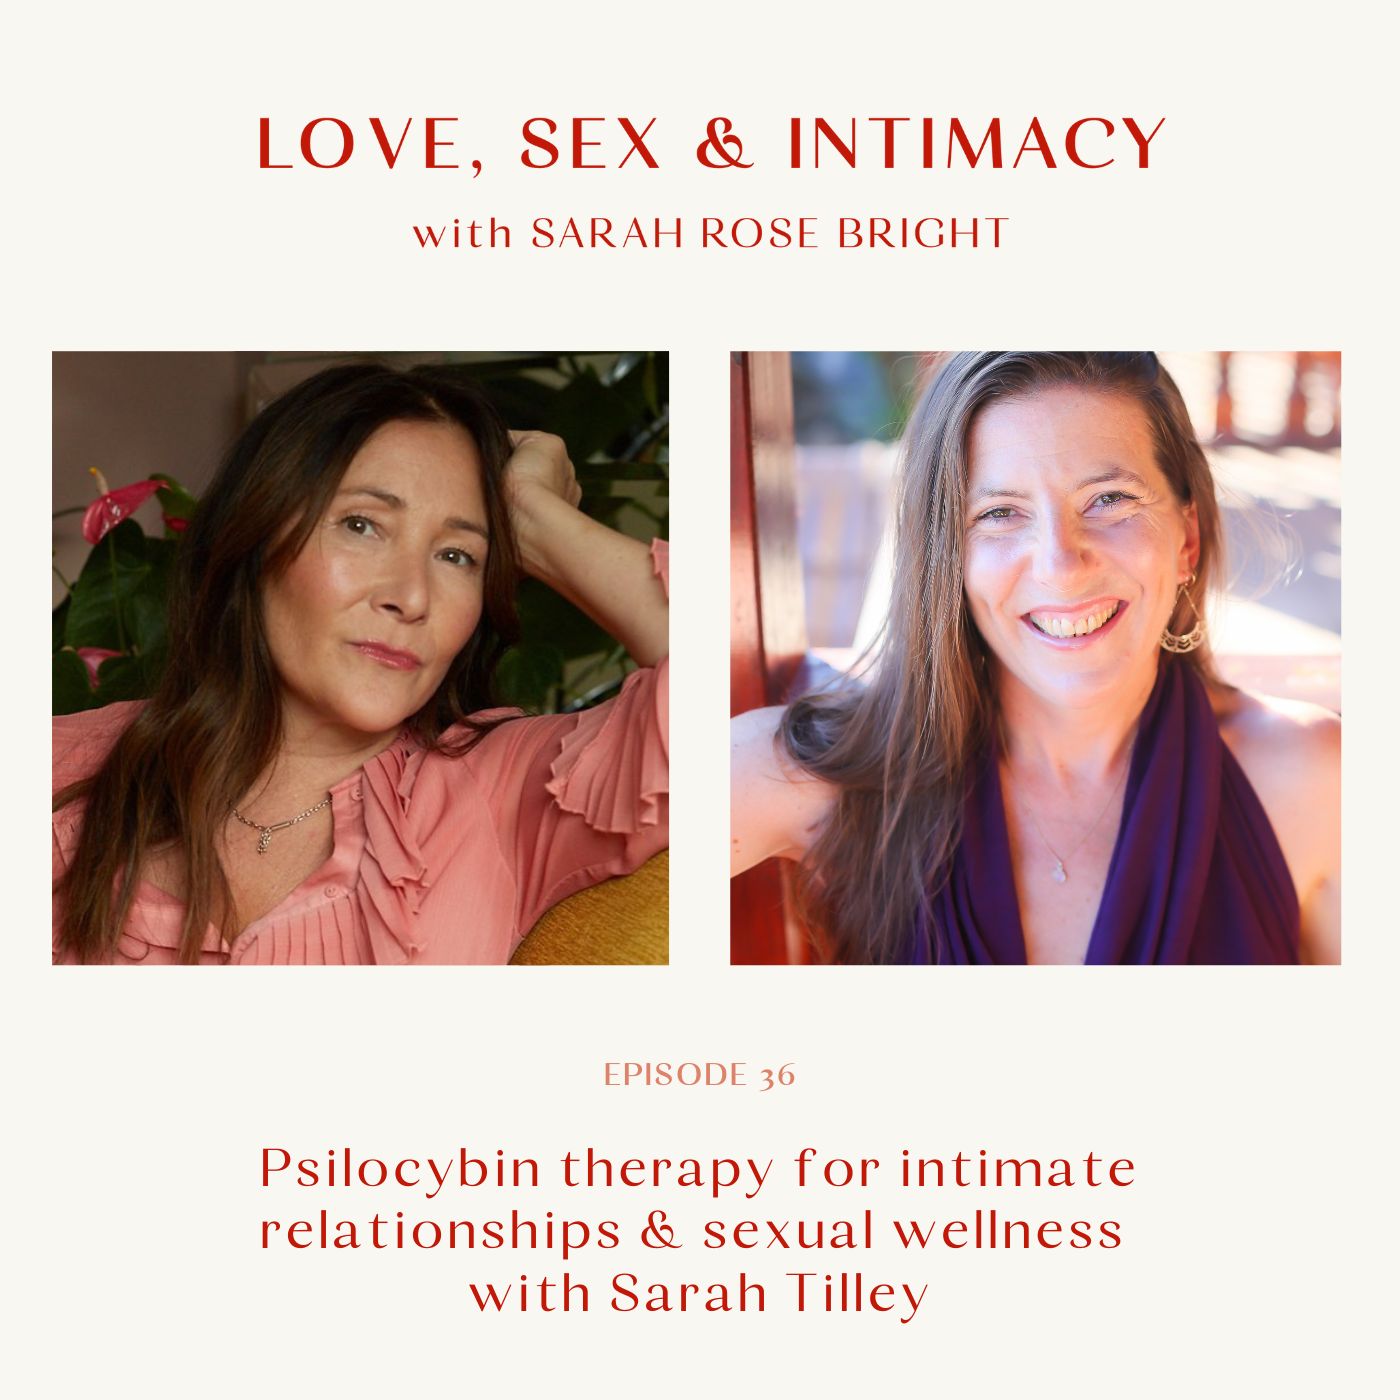 Psilocybin therapy for intimate relationships & sexual wellness with Sarah Tilley